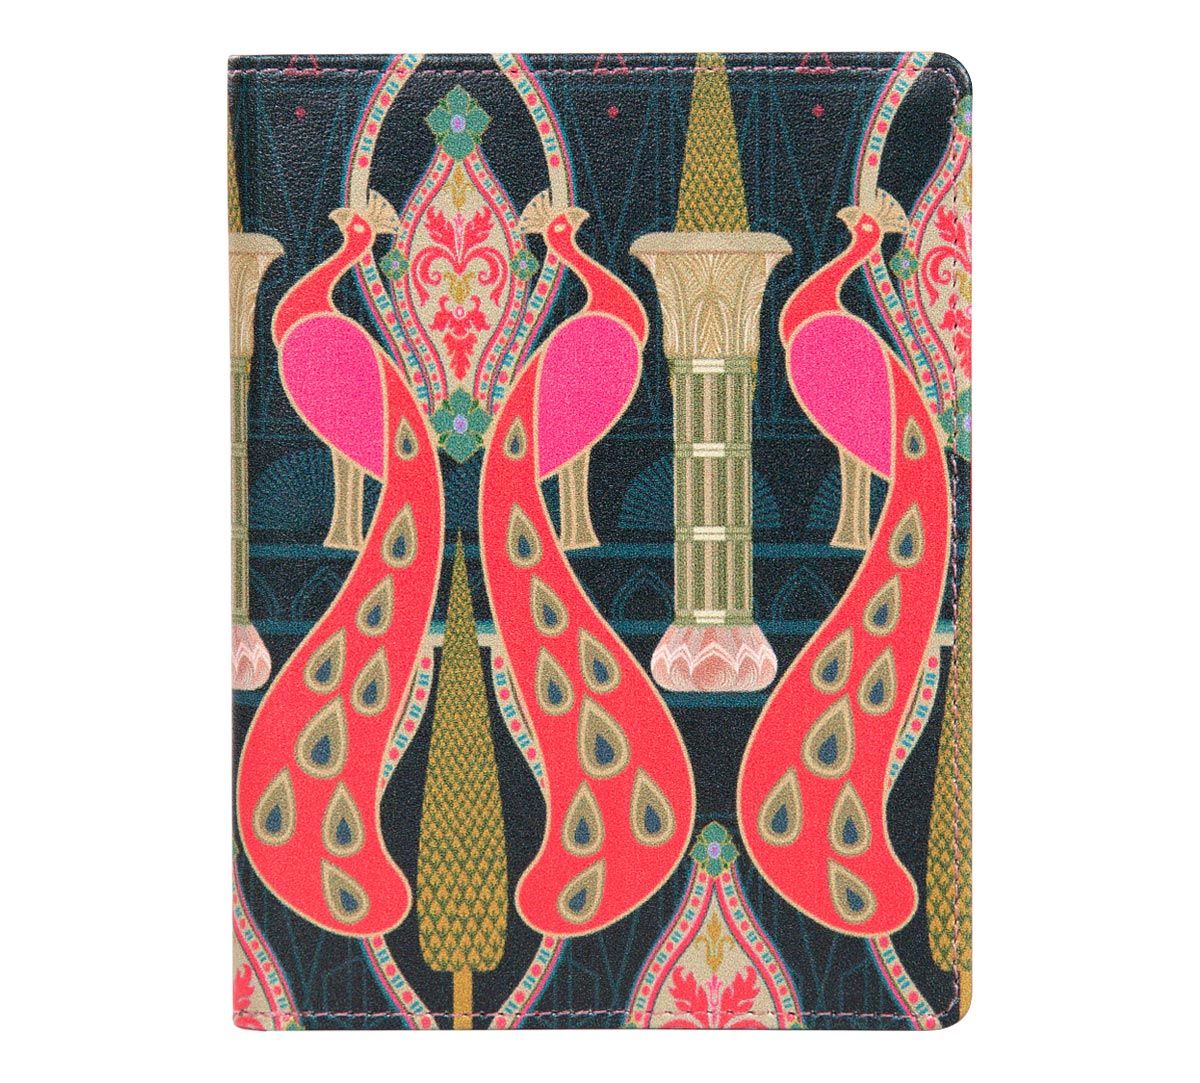 Peafowl Royalty Passport Cover